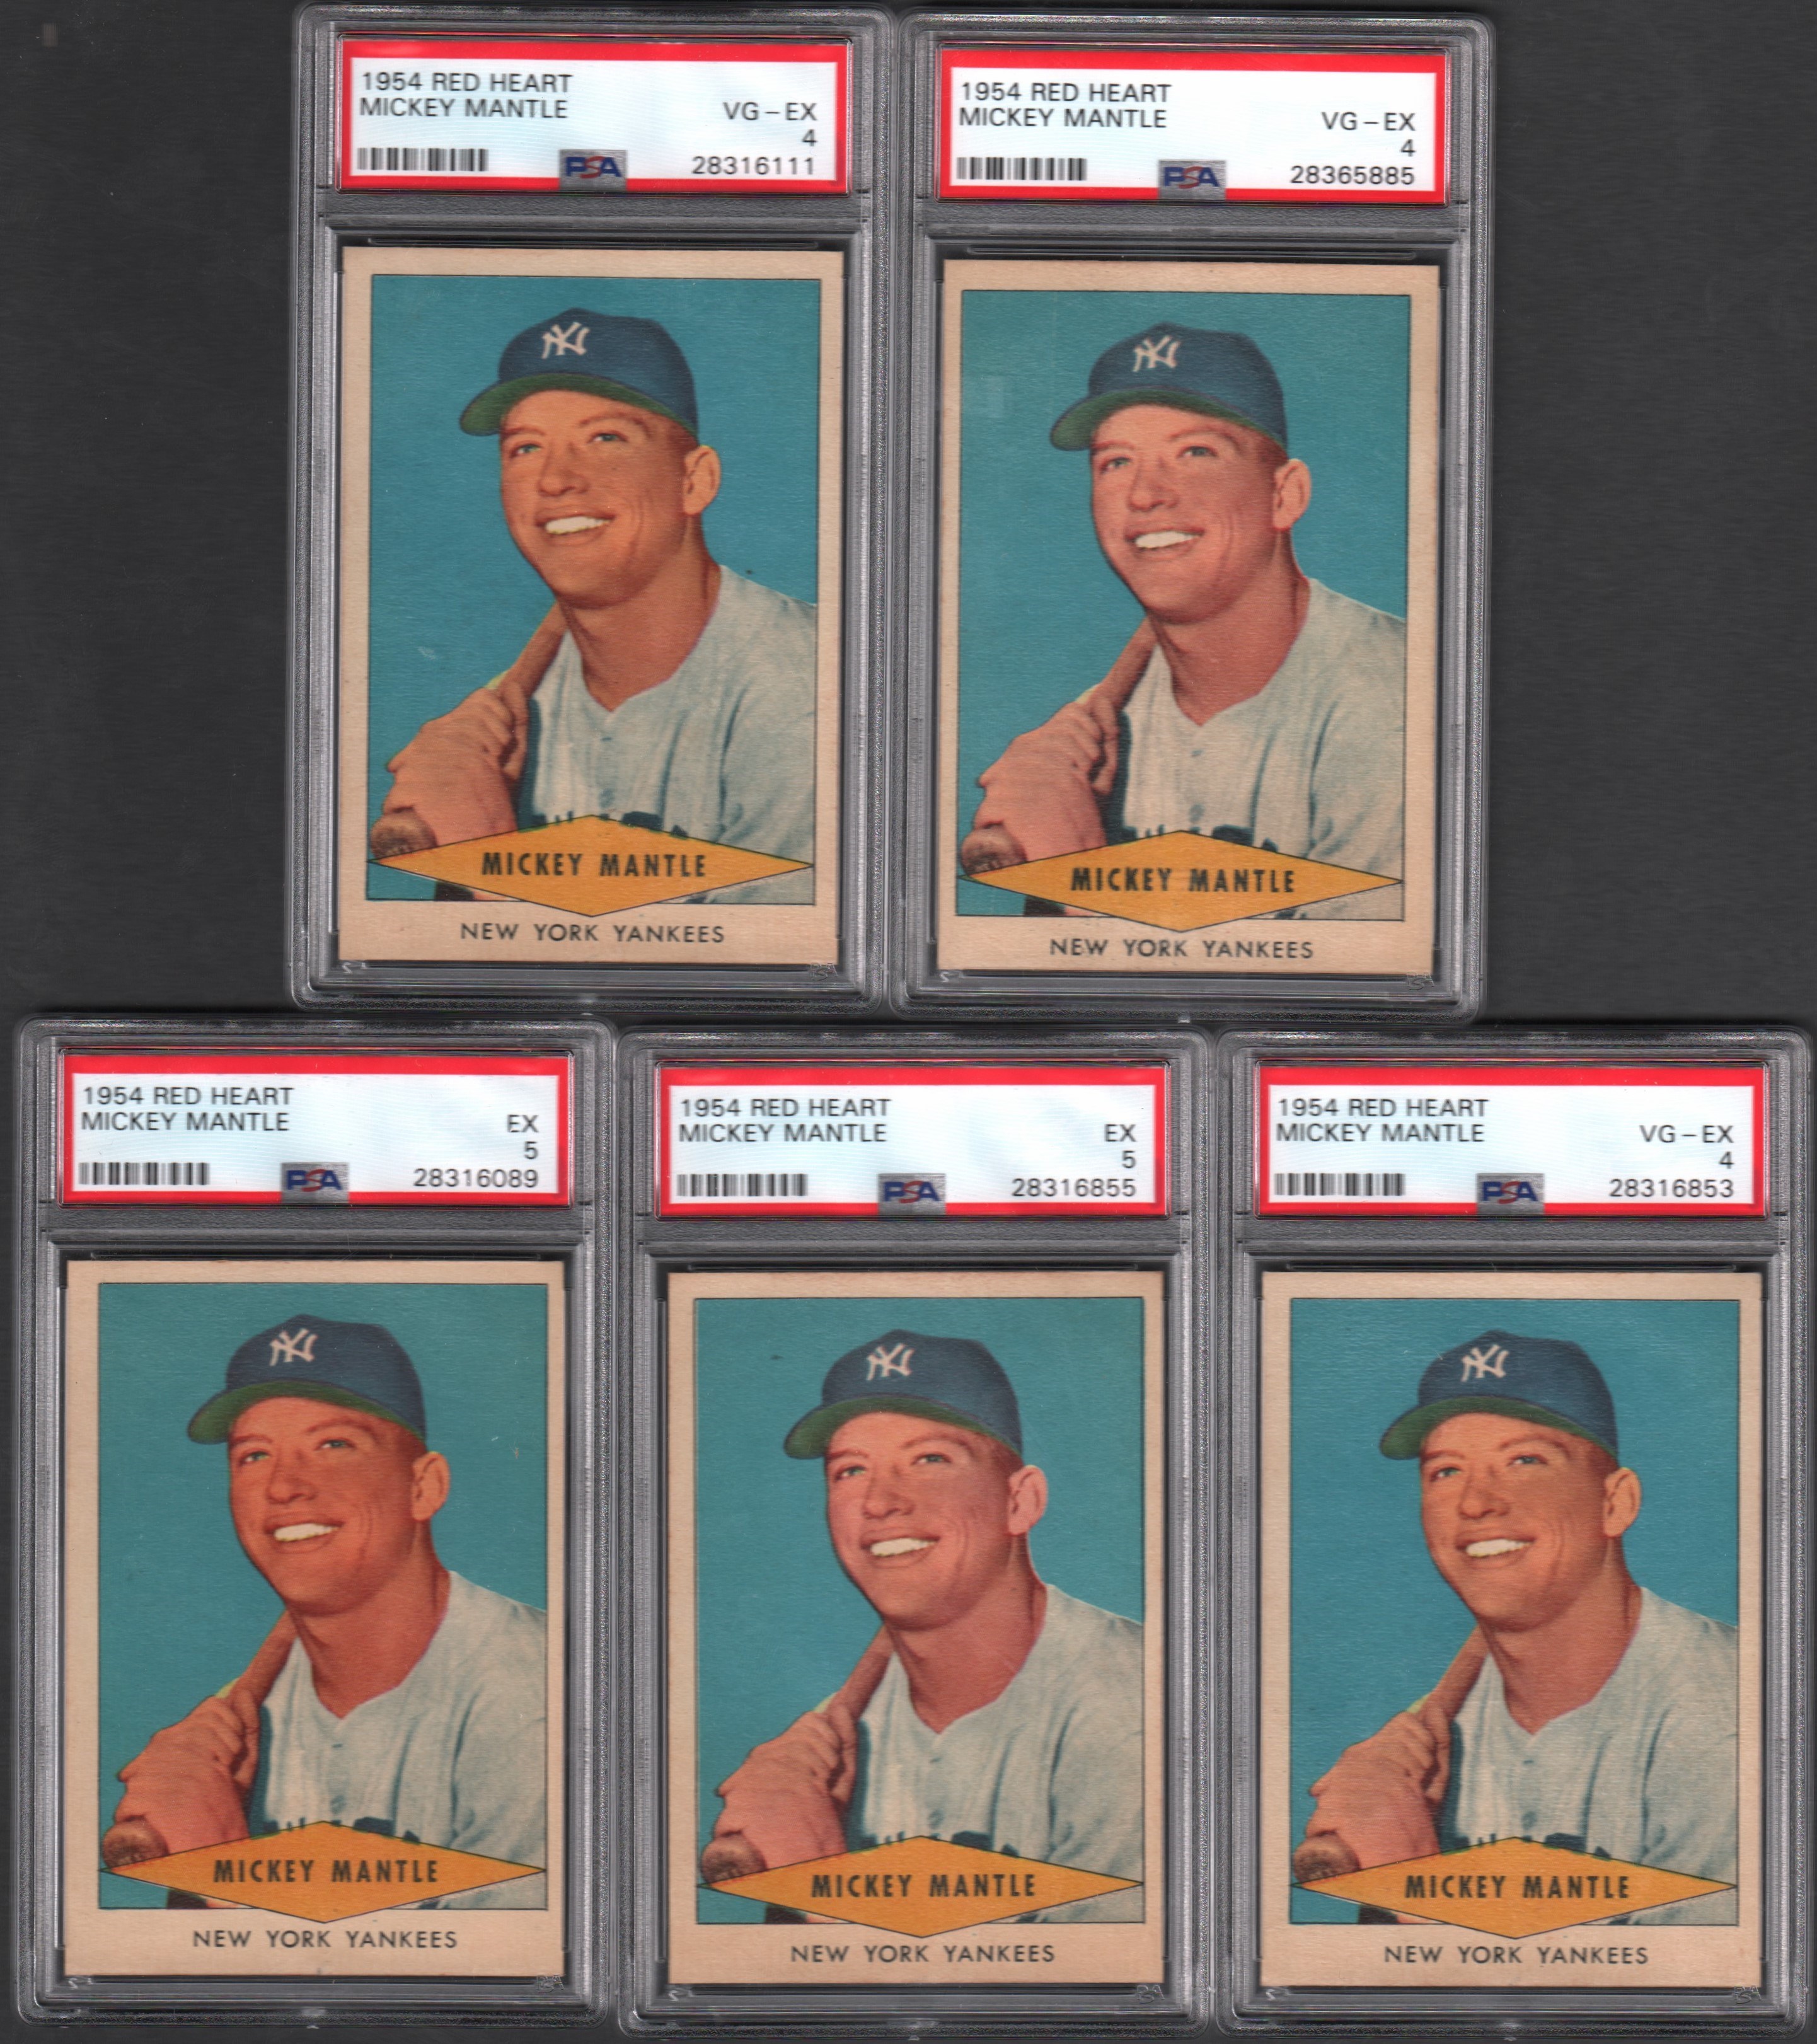 - 1954 Red Heart Mickey Mantle PSA Graded Cards (5)